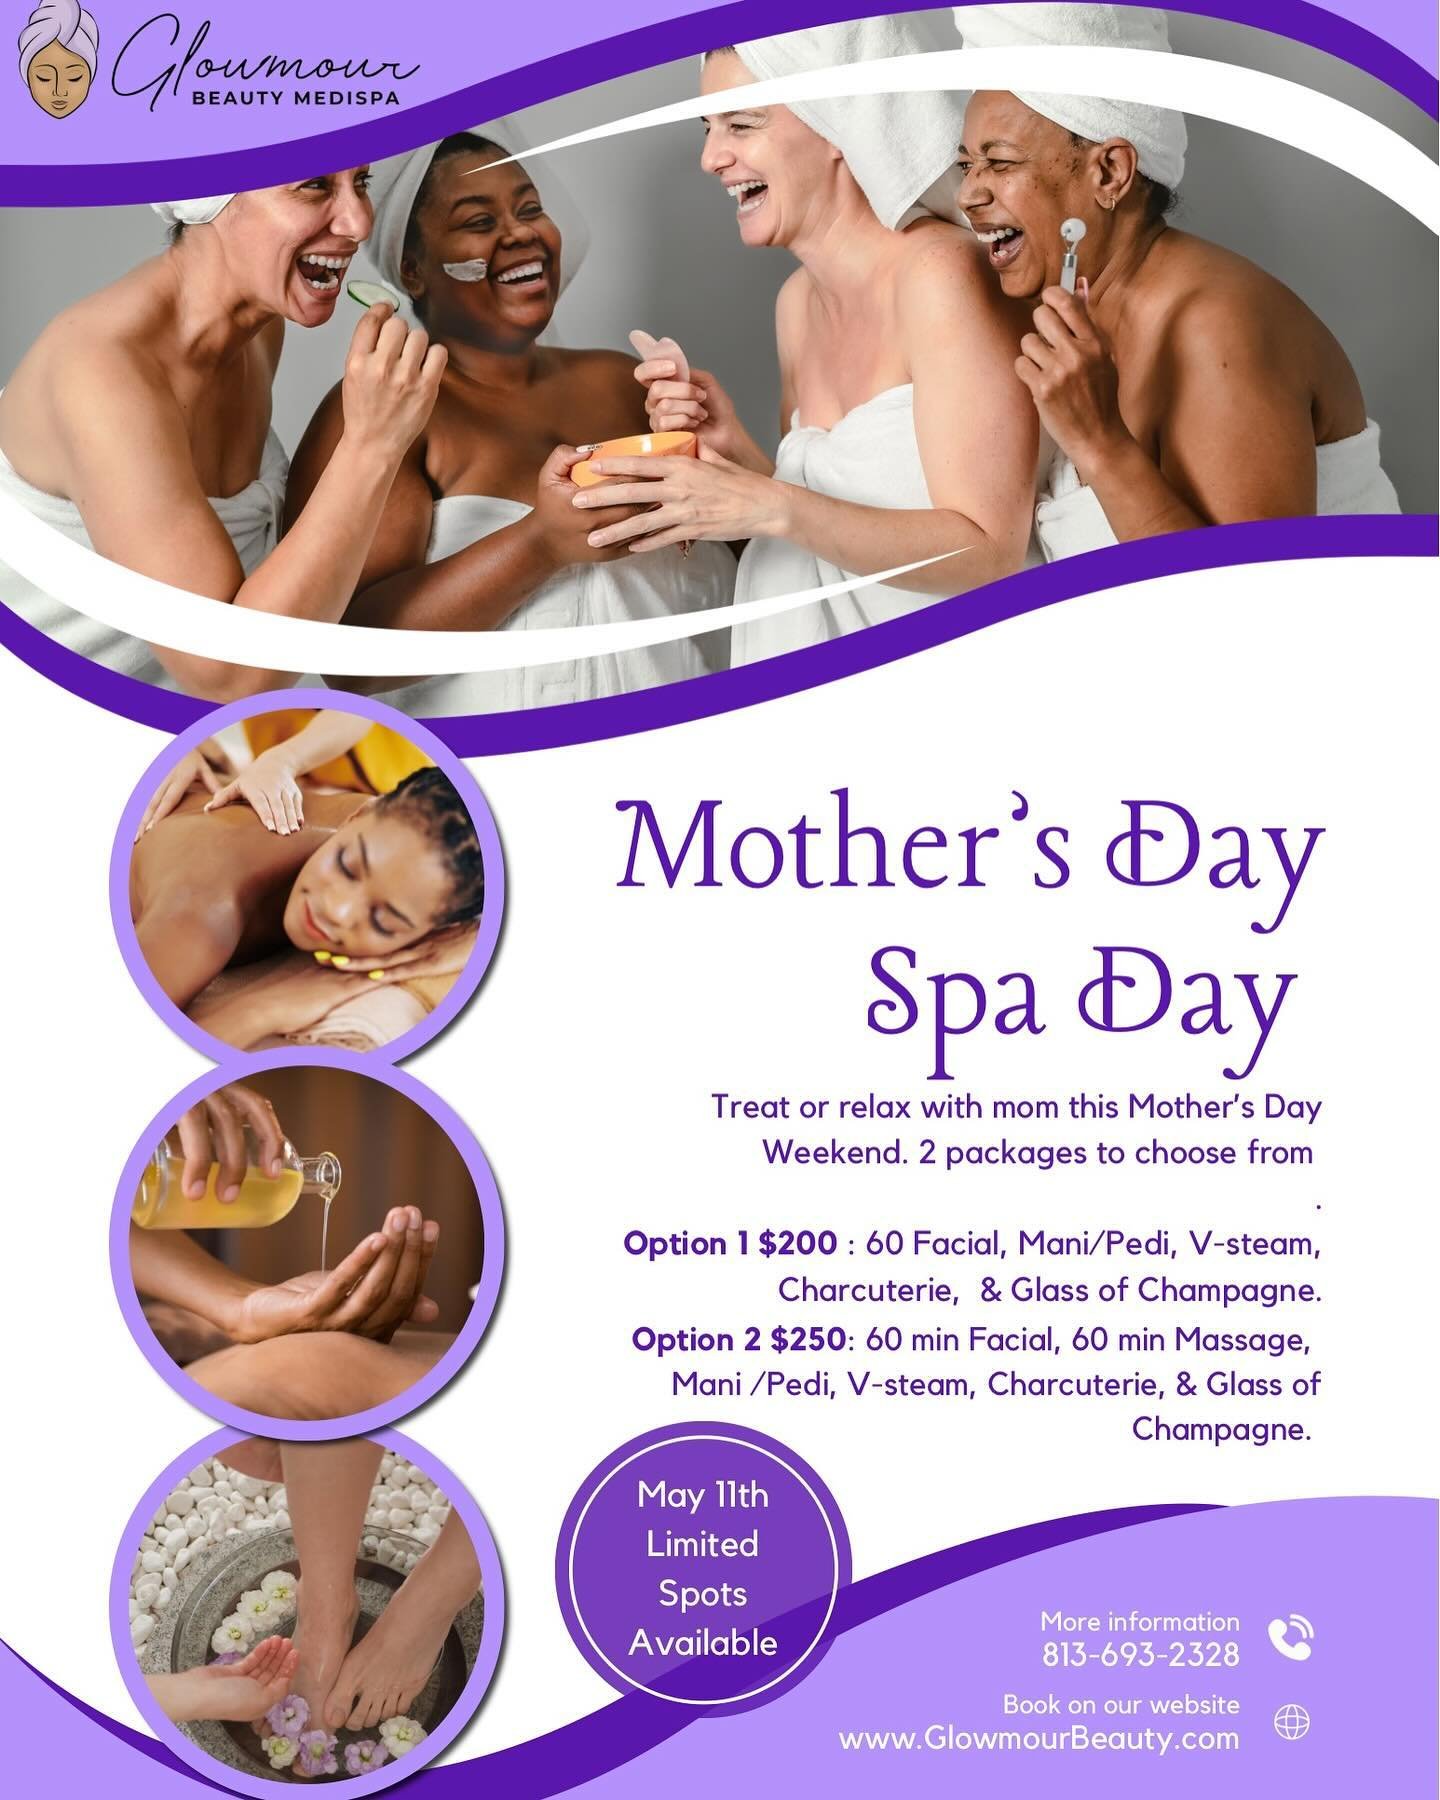 3 spots left for our Mother&rsquo;s Day Spa Day at Glowmour!! We have massage with @breathewithme.rh, mani/pedis from @nairaselfmade_, facials from @her_necessity &amp; @sckinglow, charcuterie from @sapphire_lagoon_charcuterie &amp; more! 

Link in b